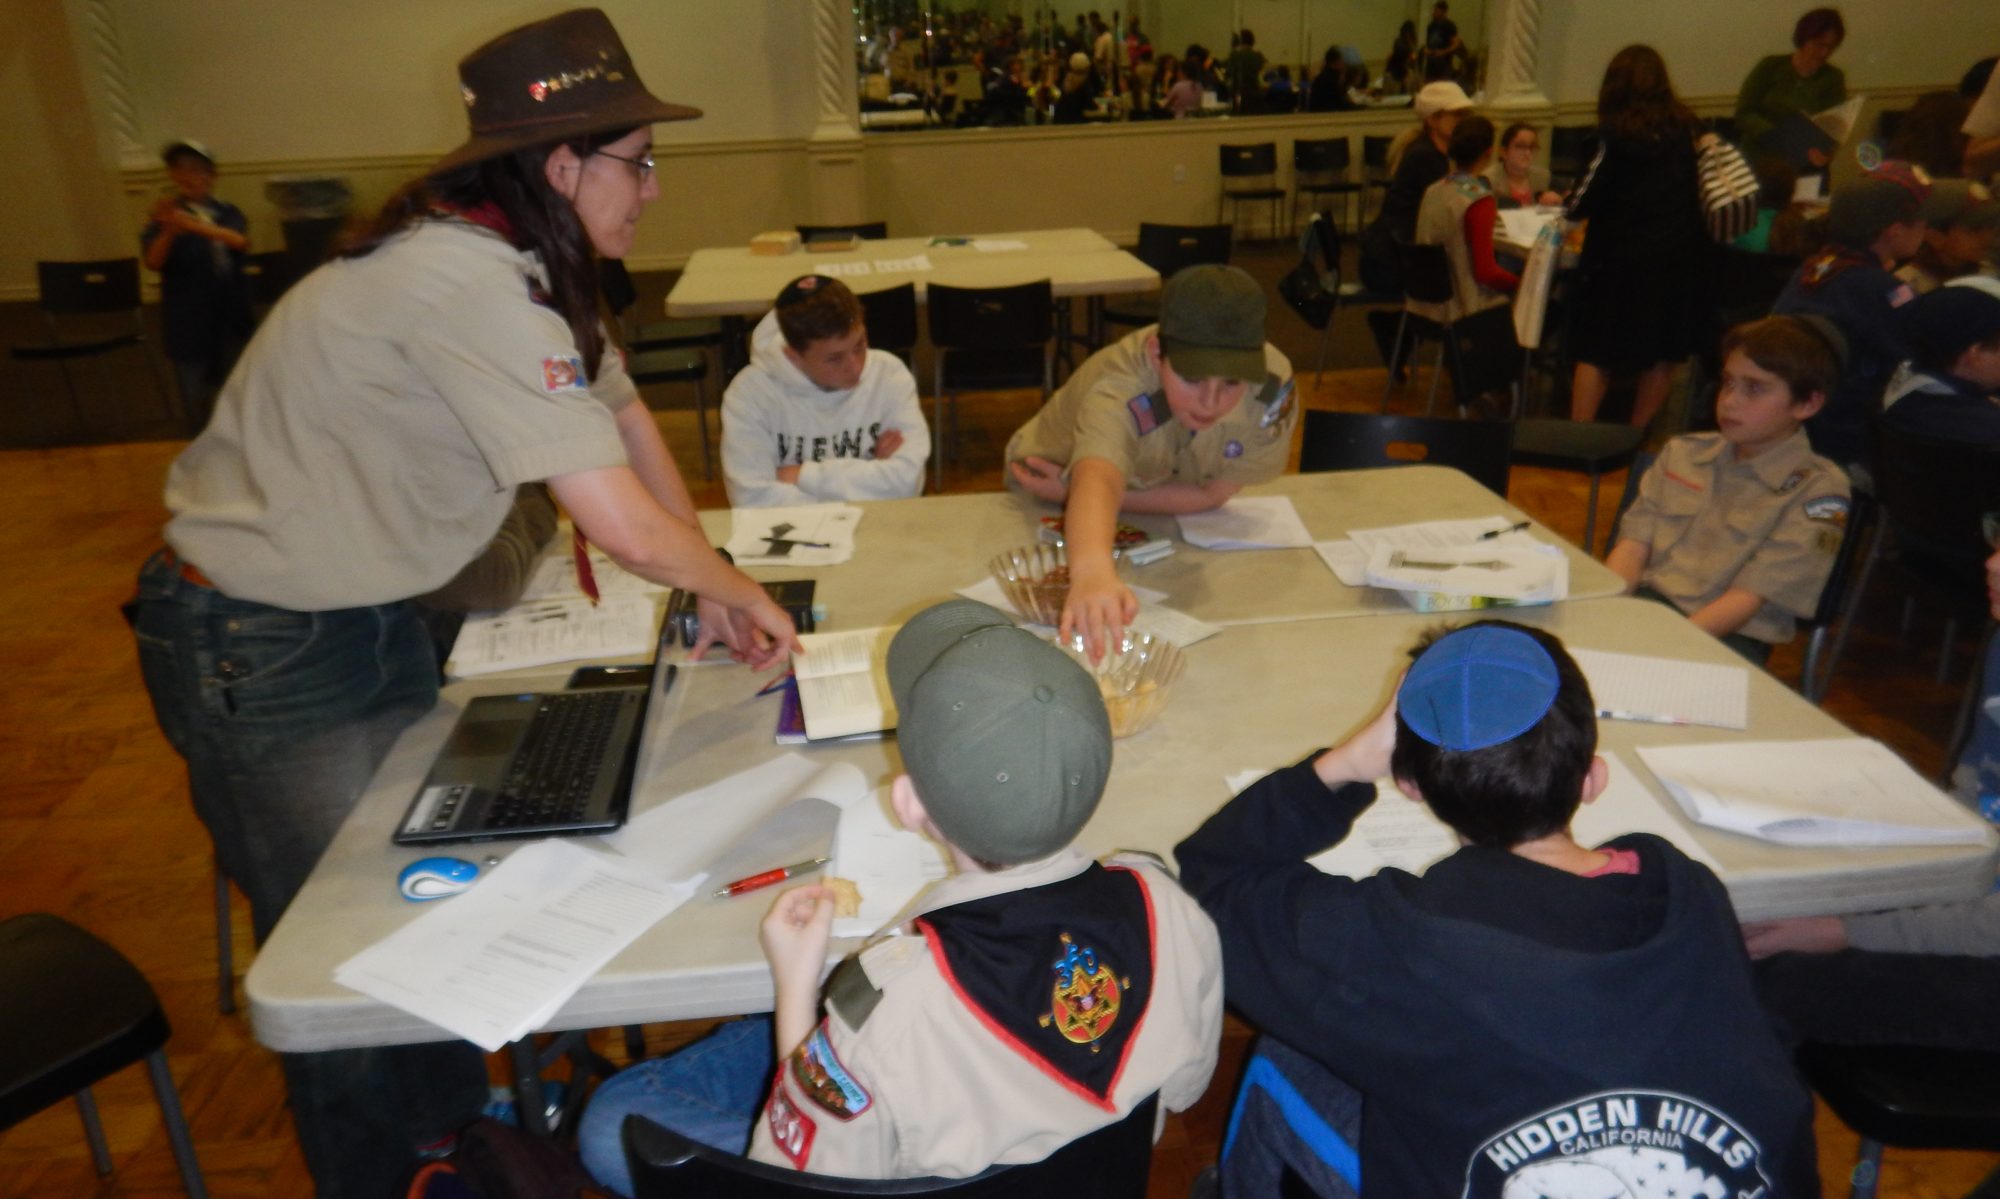 Jewish Committee on Scouting – Western Los Angeles County Council